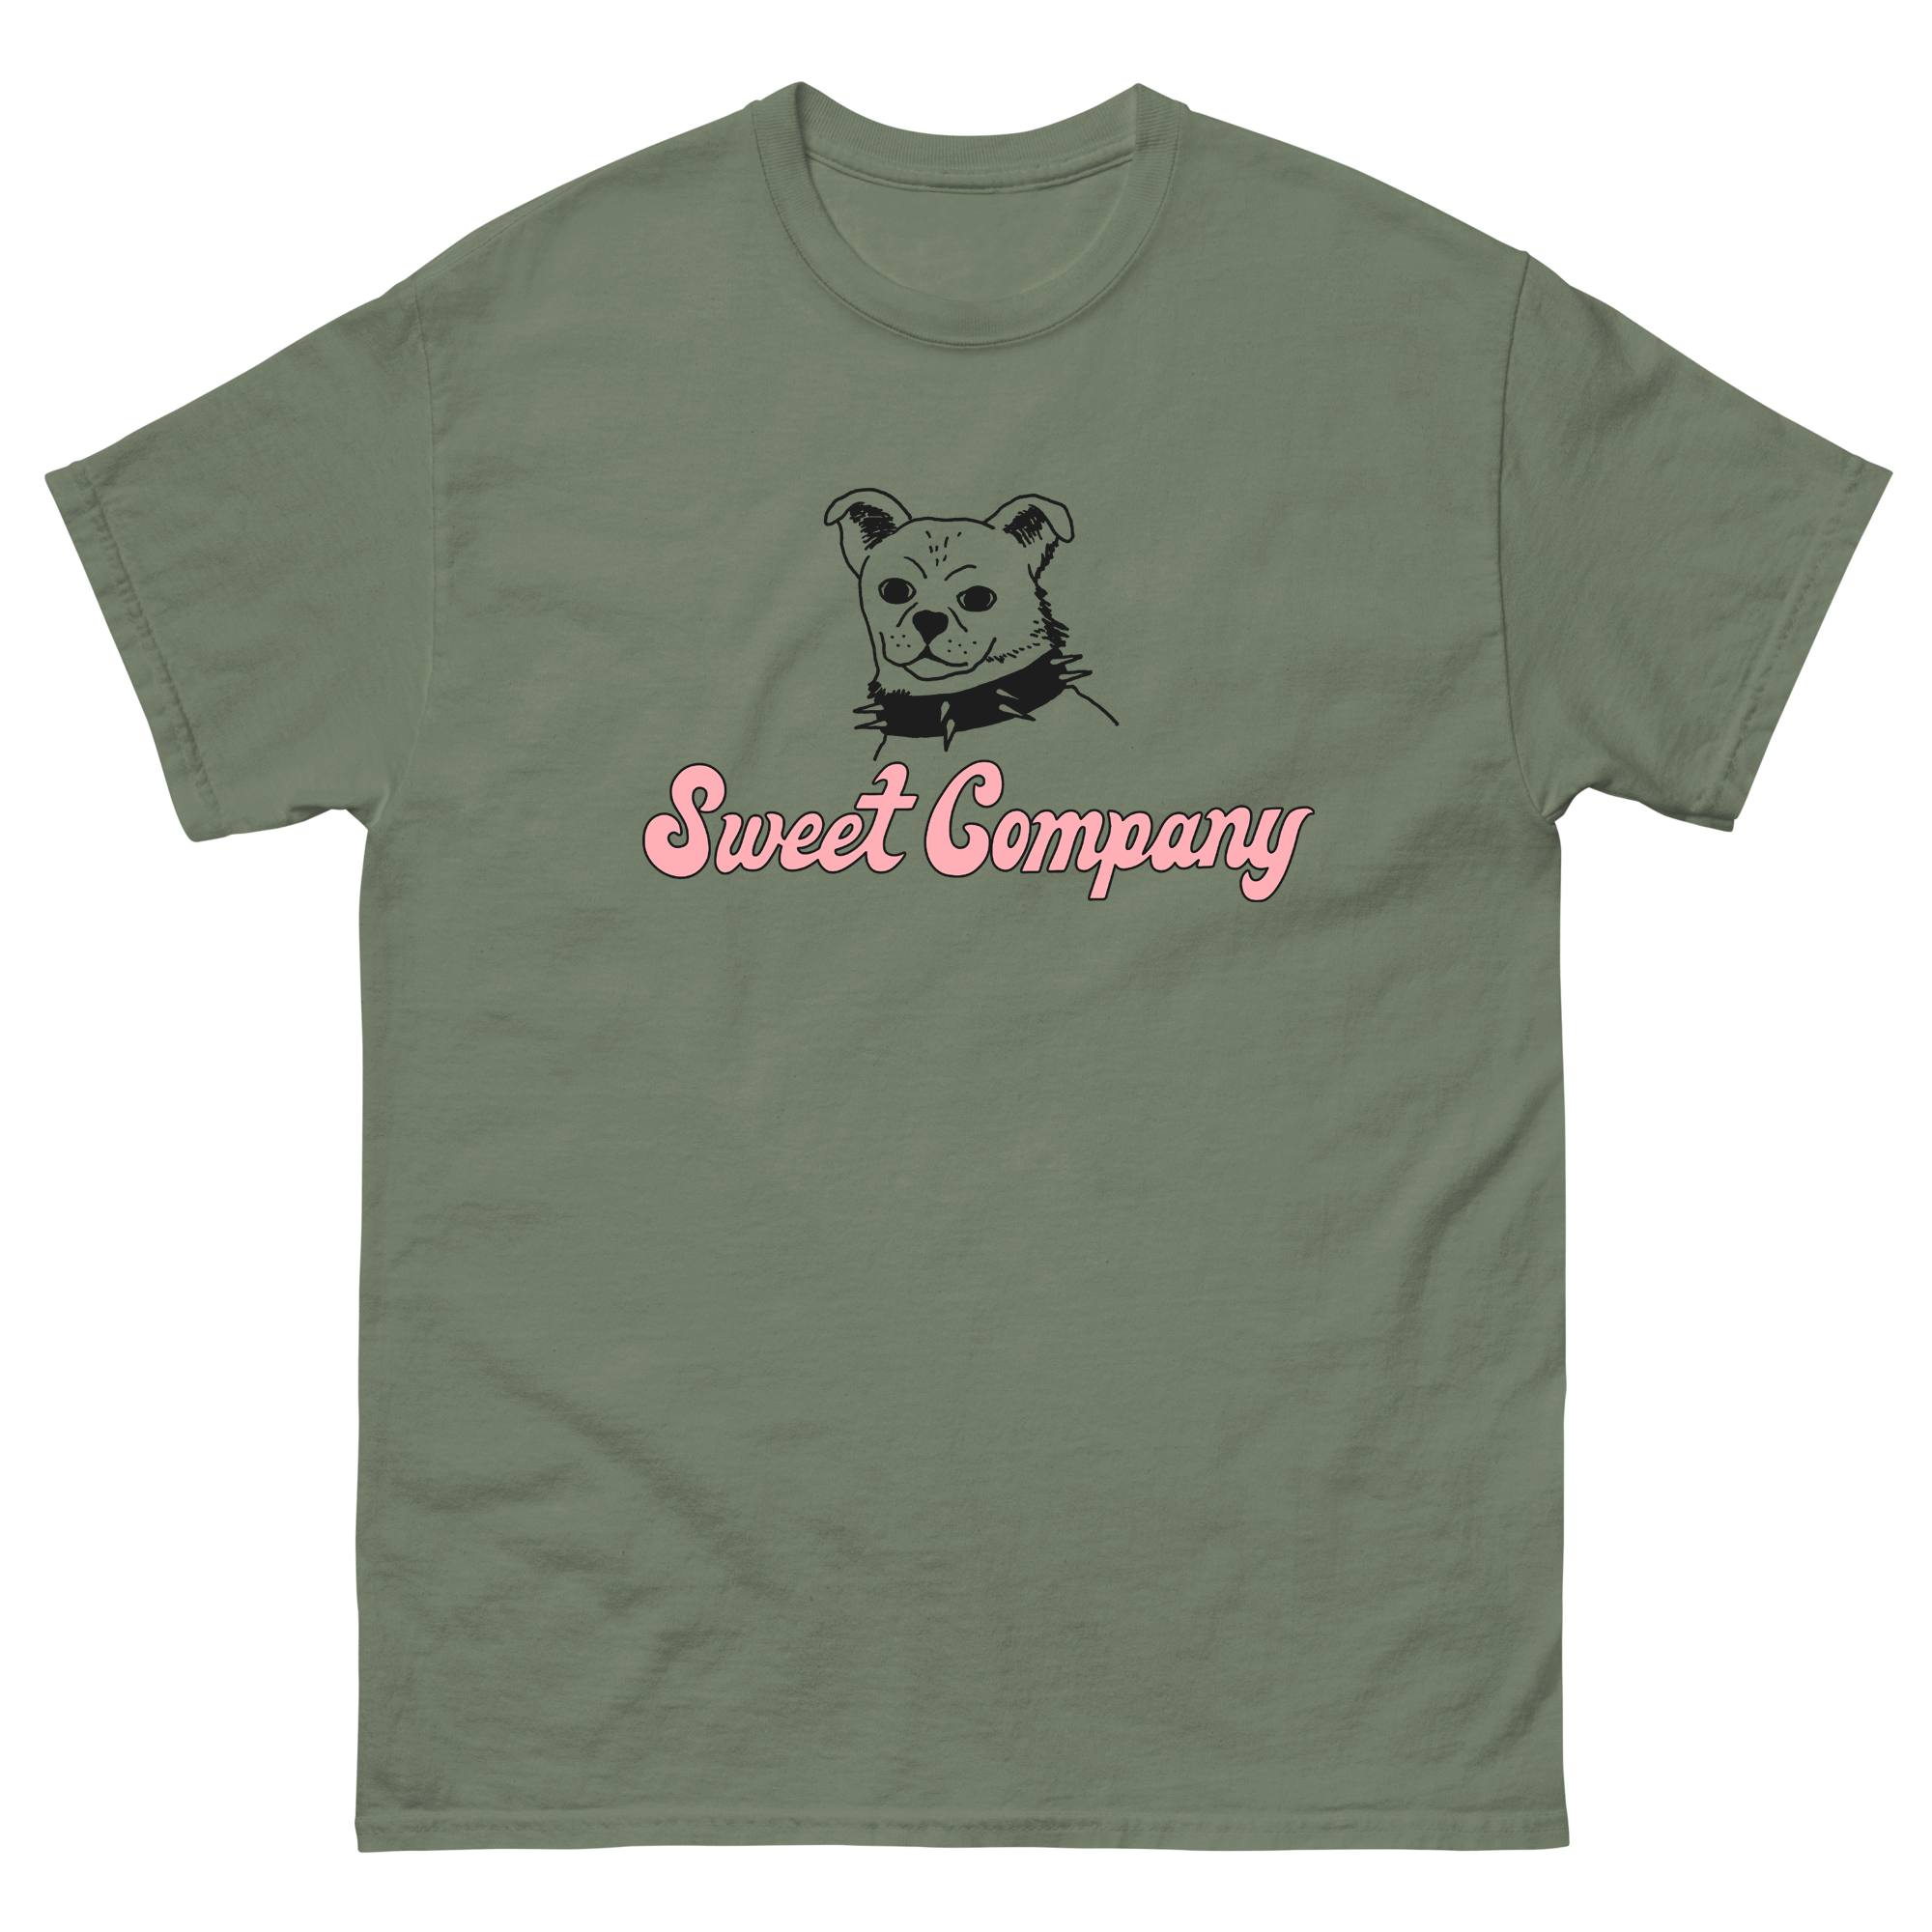 Sweet Company T-Shirt - Front